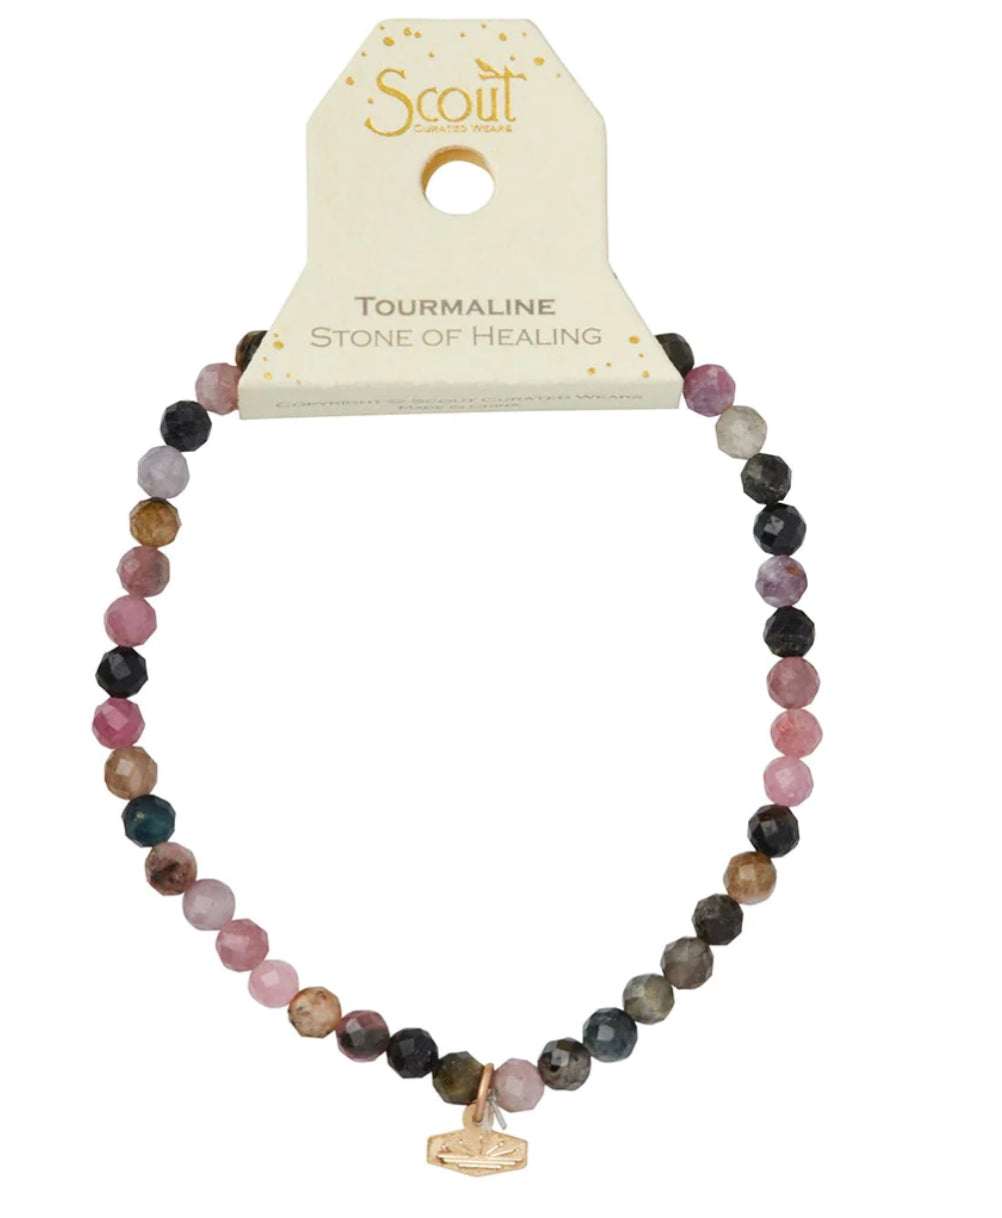 SCOUT Mini Faceted Stone Tourmaline